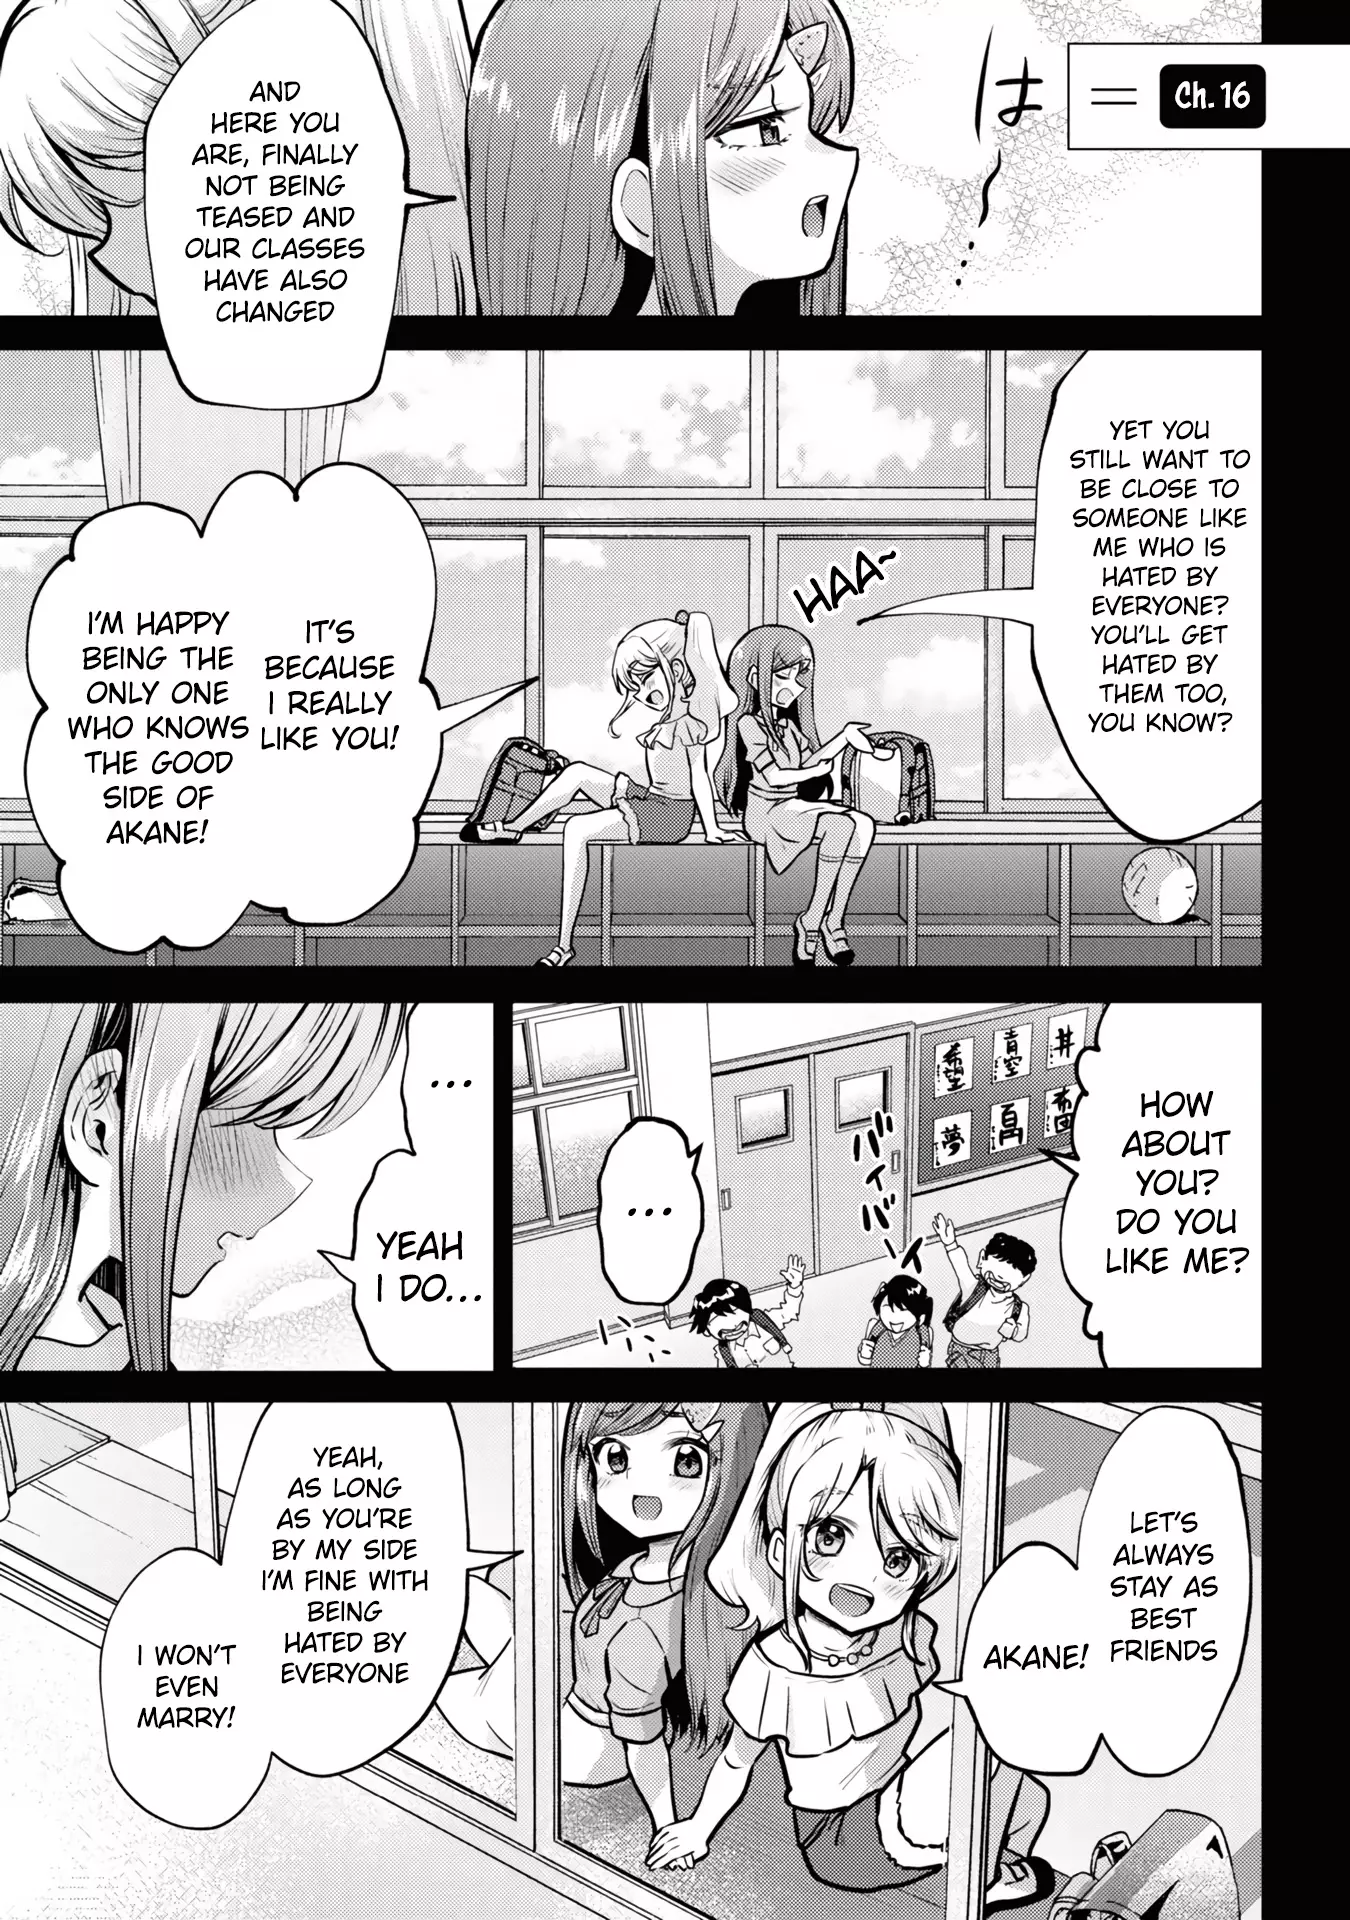 I'm Getting Married To A Girl I Hate In My Class - 16.1 page 3-68fc4686